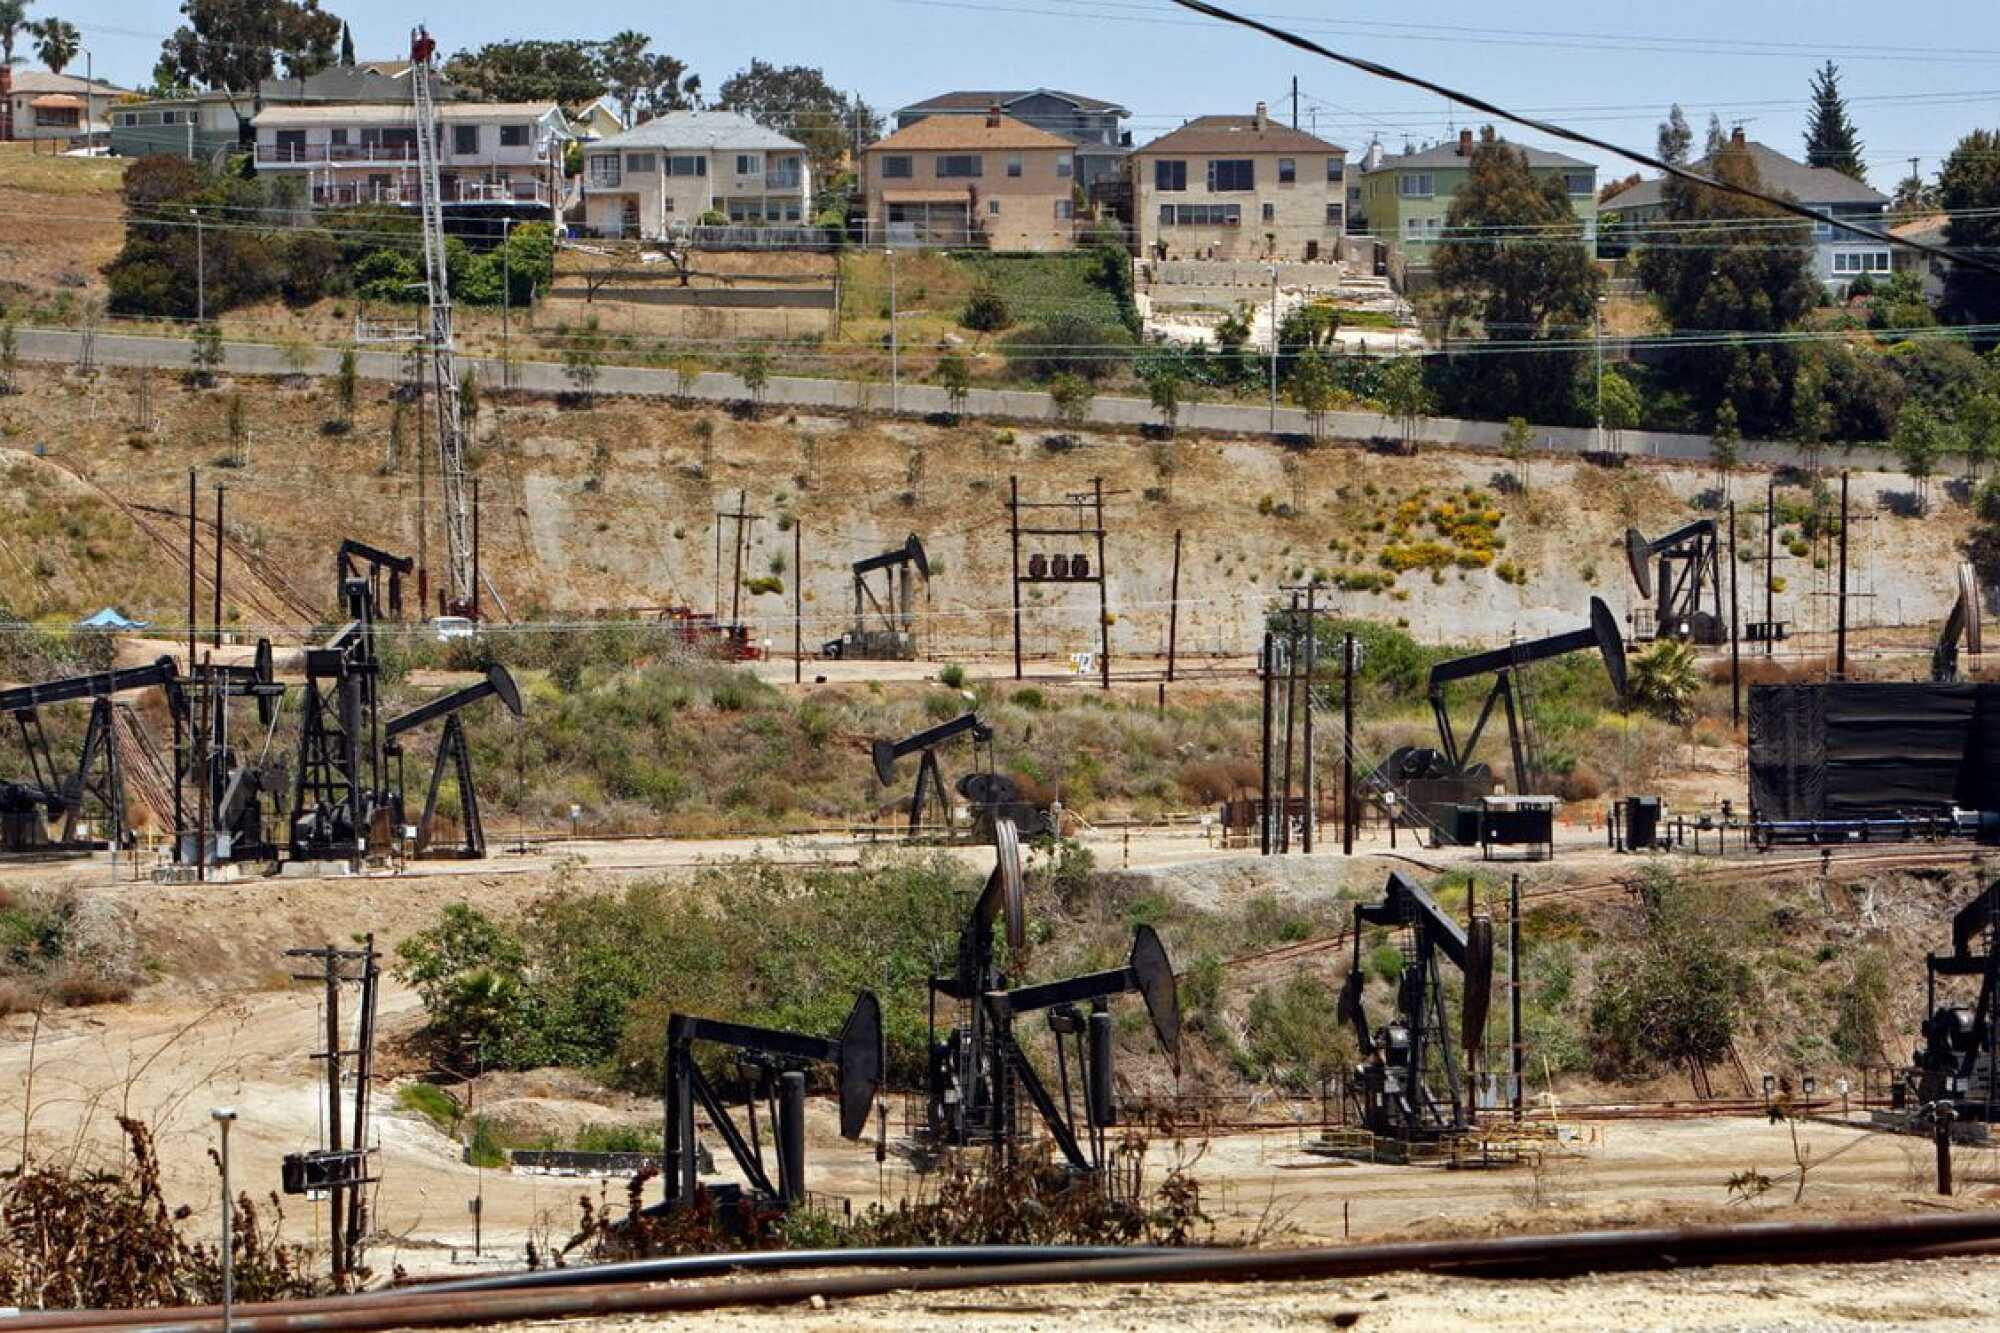 A residential community rises behind a field of oil pumpjacks.